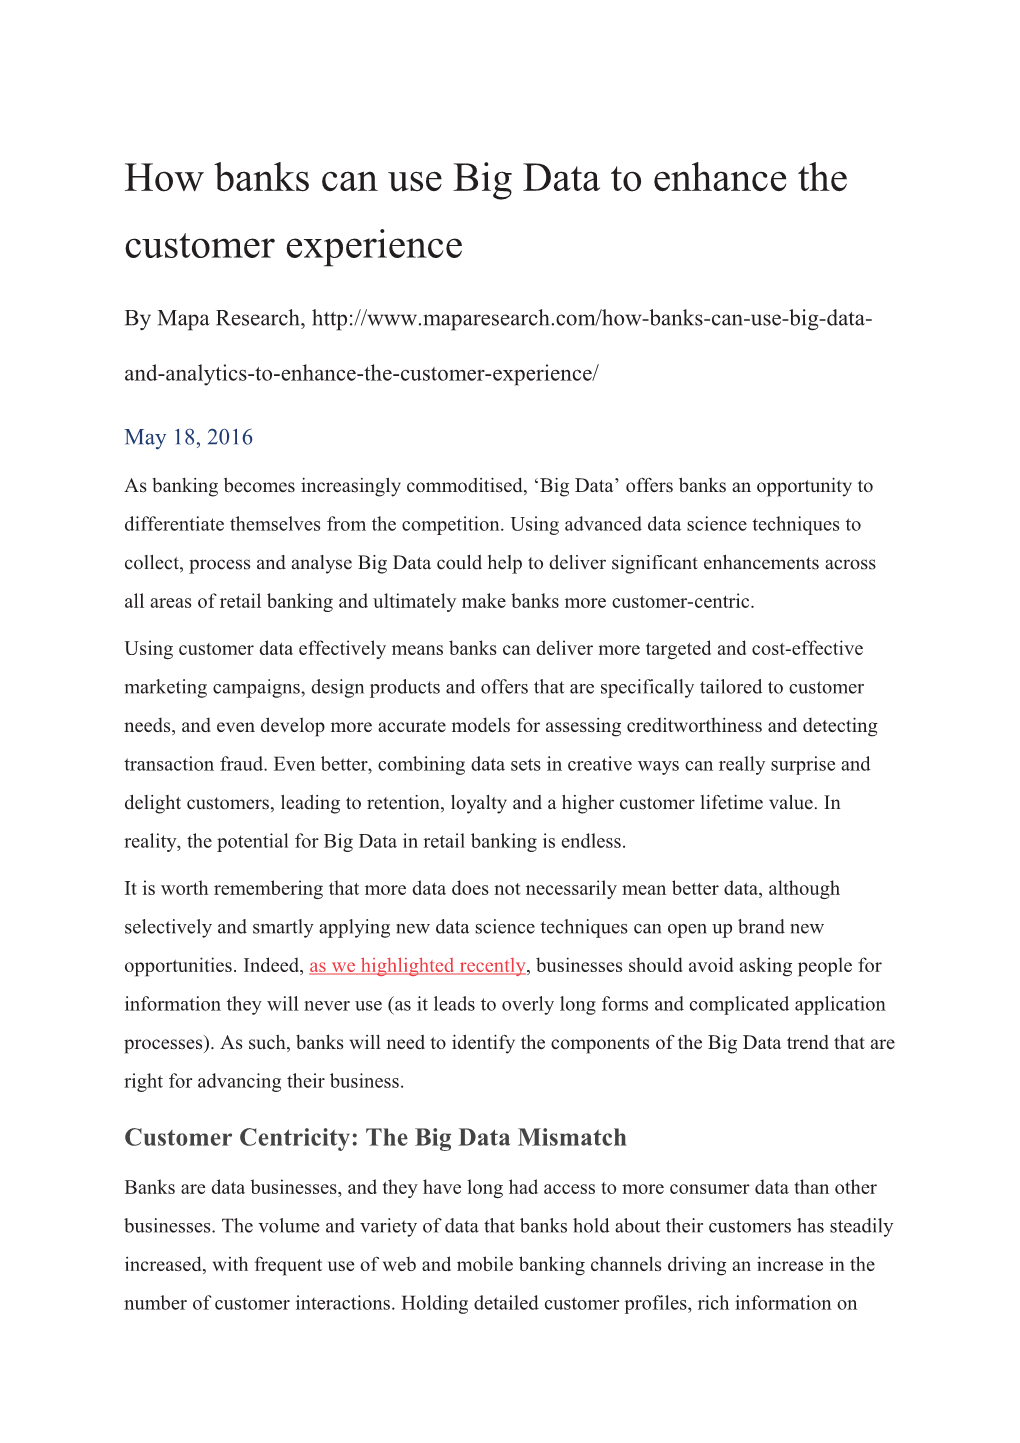 How Banks Can Use Big Data to Enhance the Customer Experience